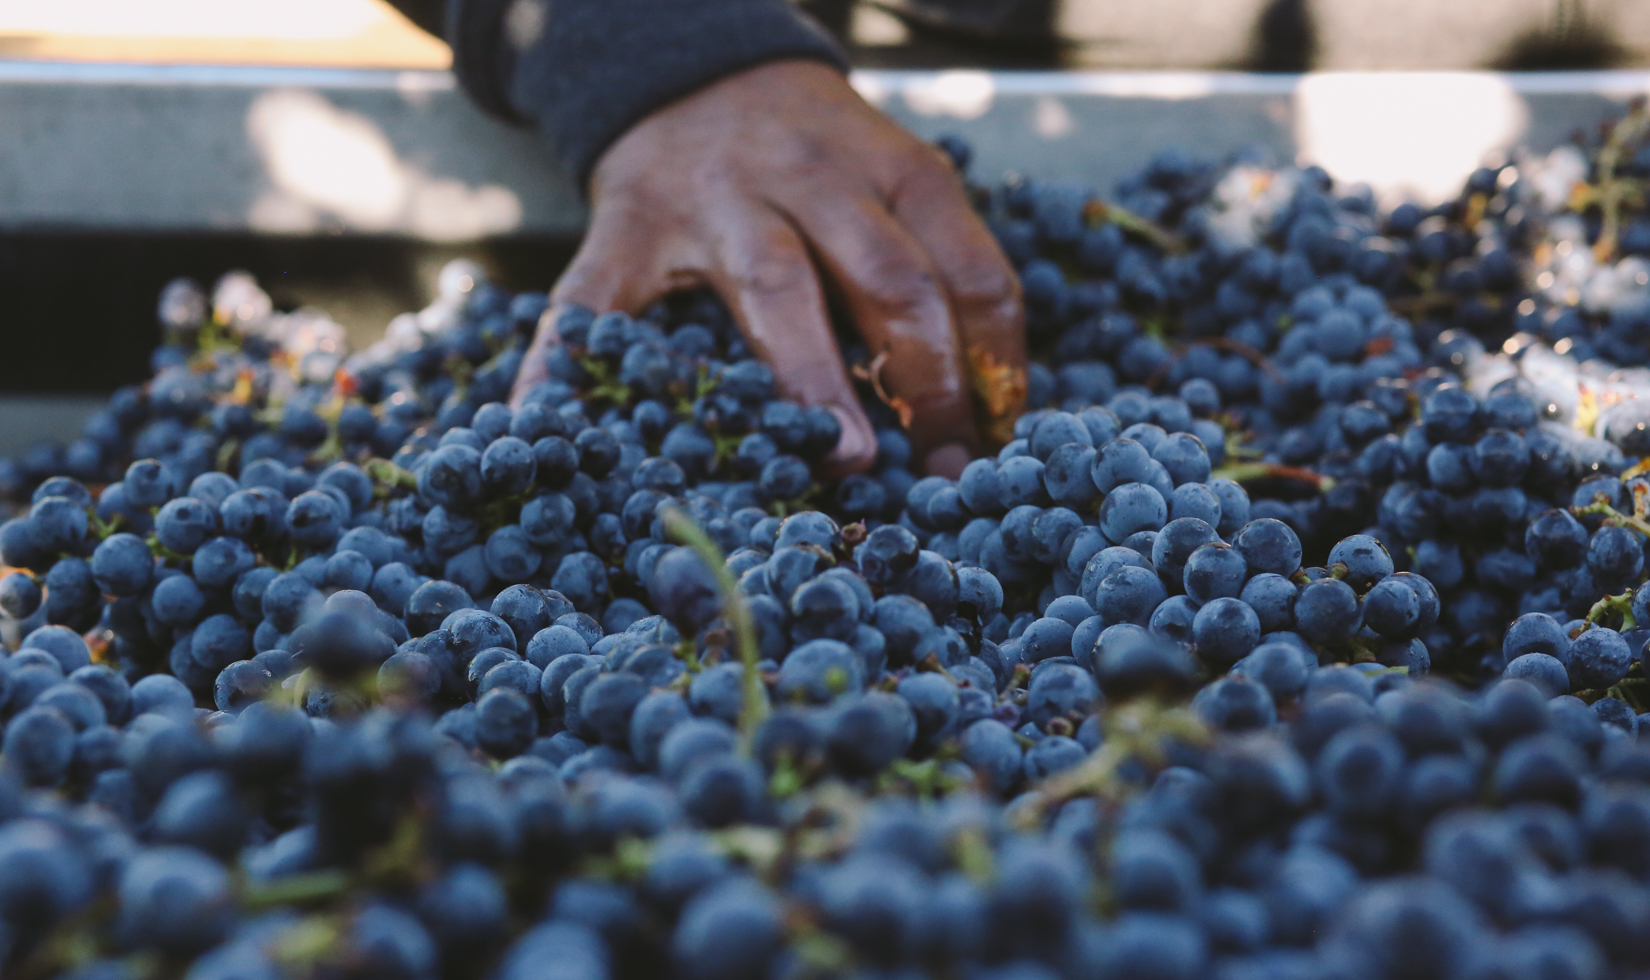 Extreme close-up of freshly harvested purple grapes being touched by a worker's hand.